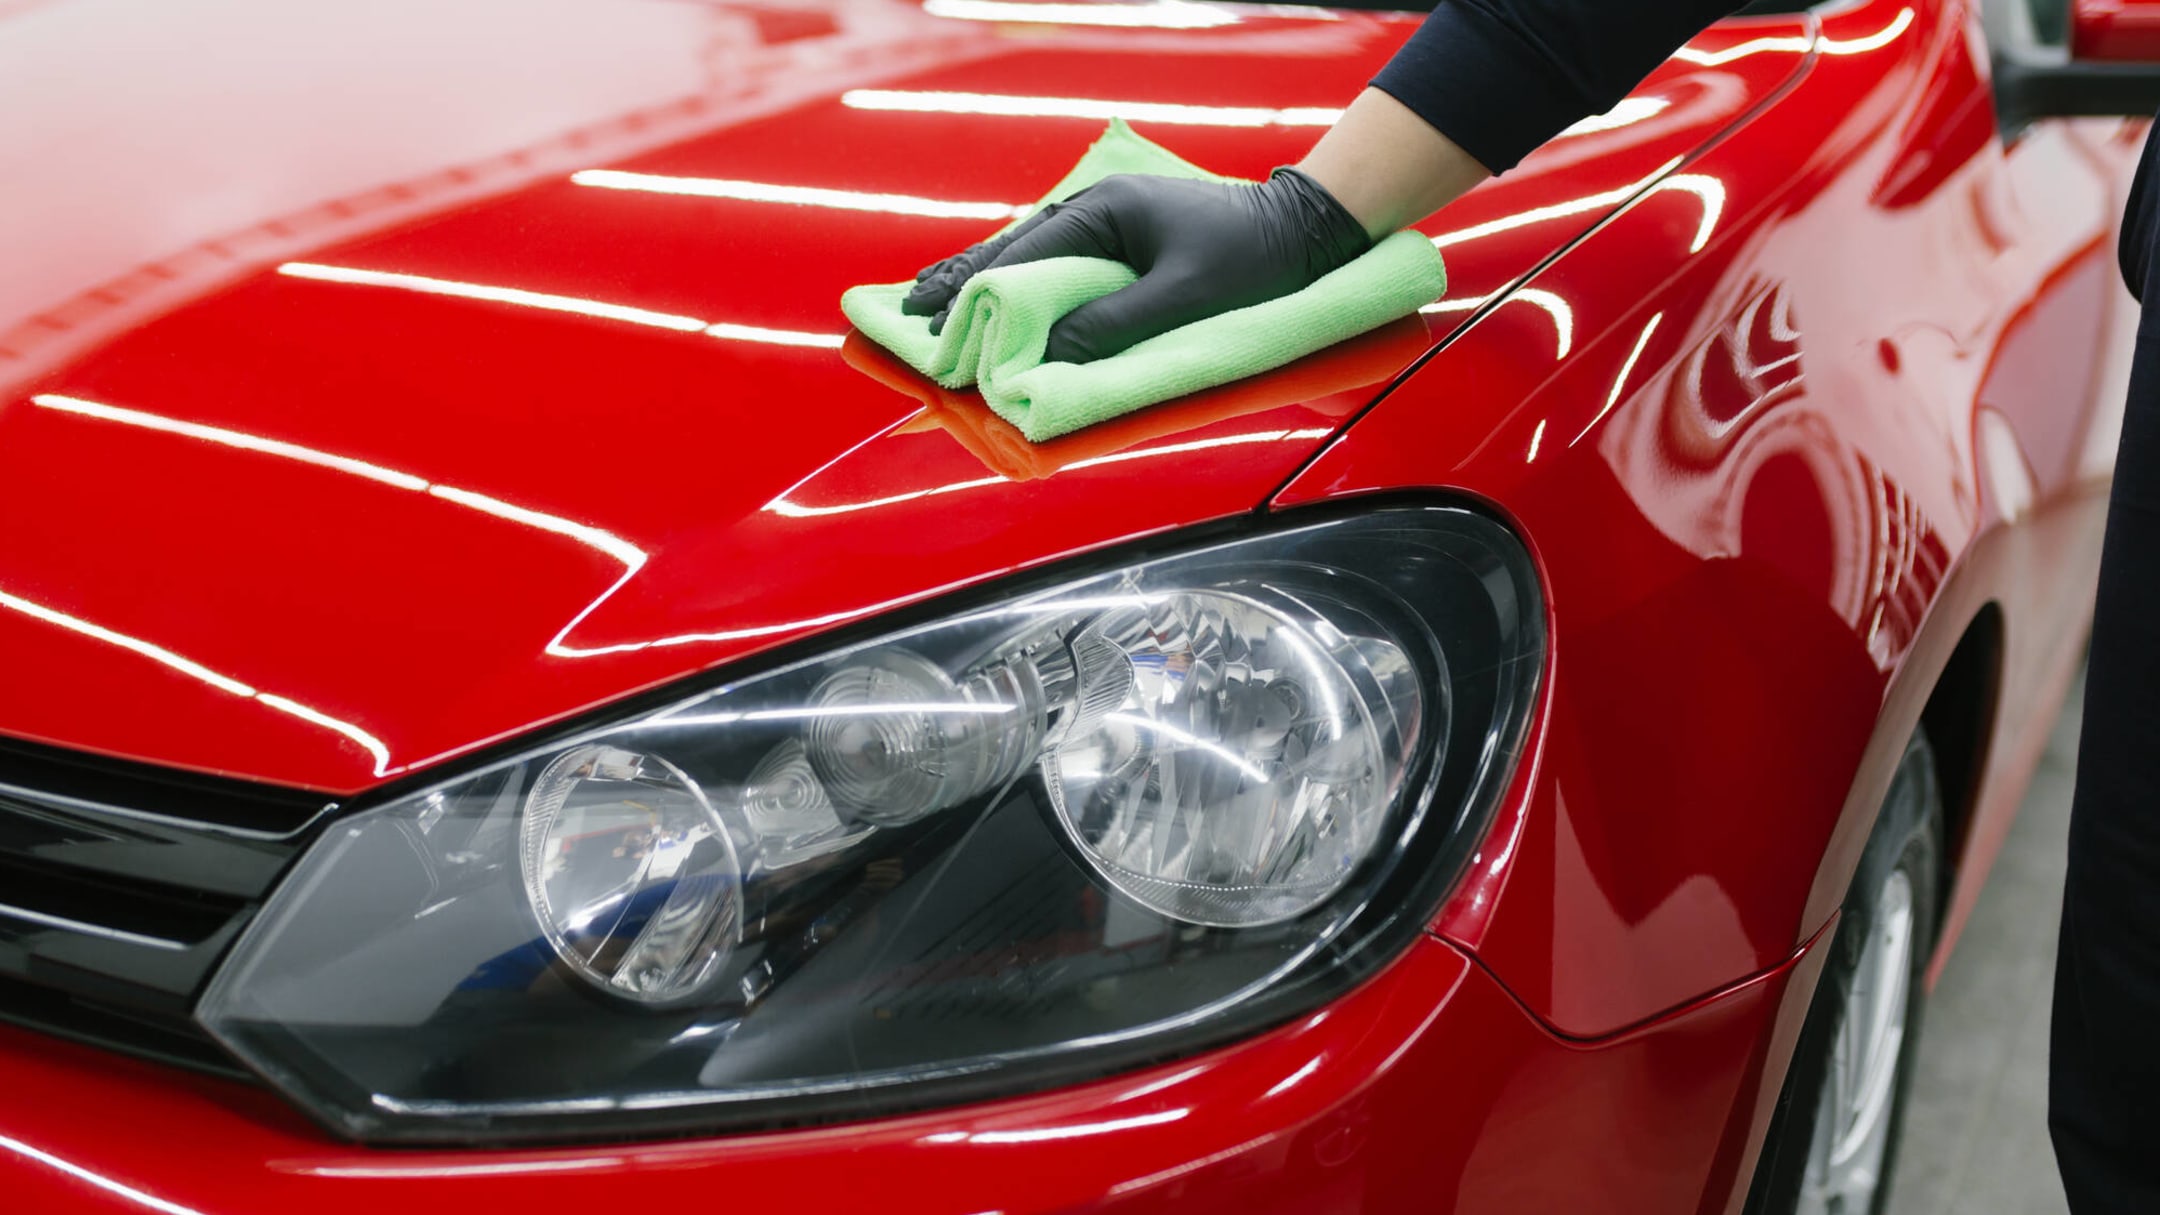 10 Tips To Help Keep The Interior Of Your Car Clean